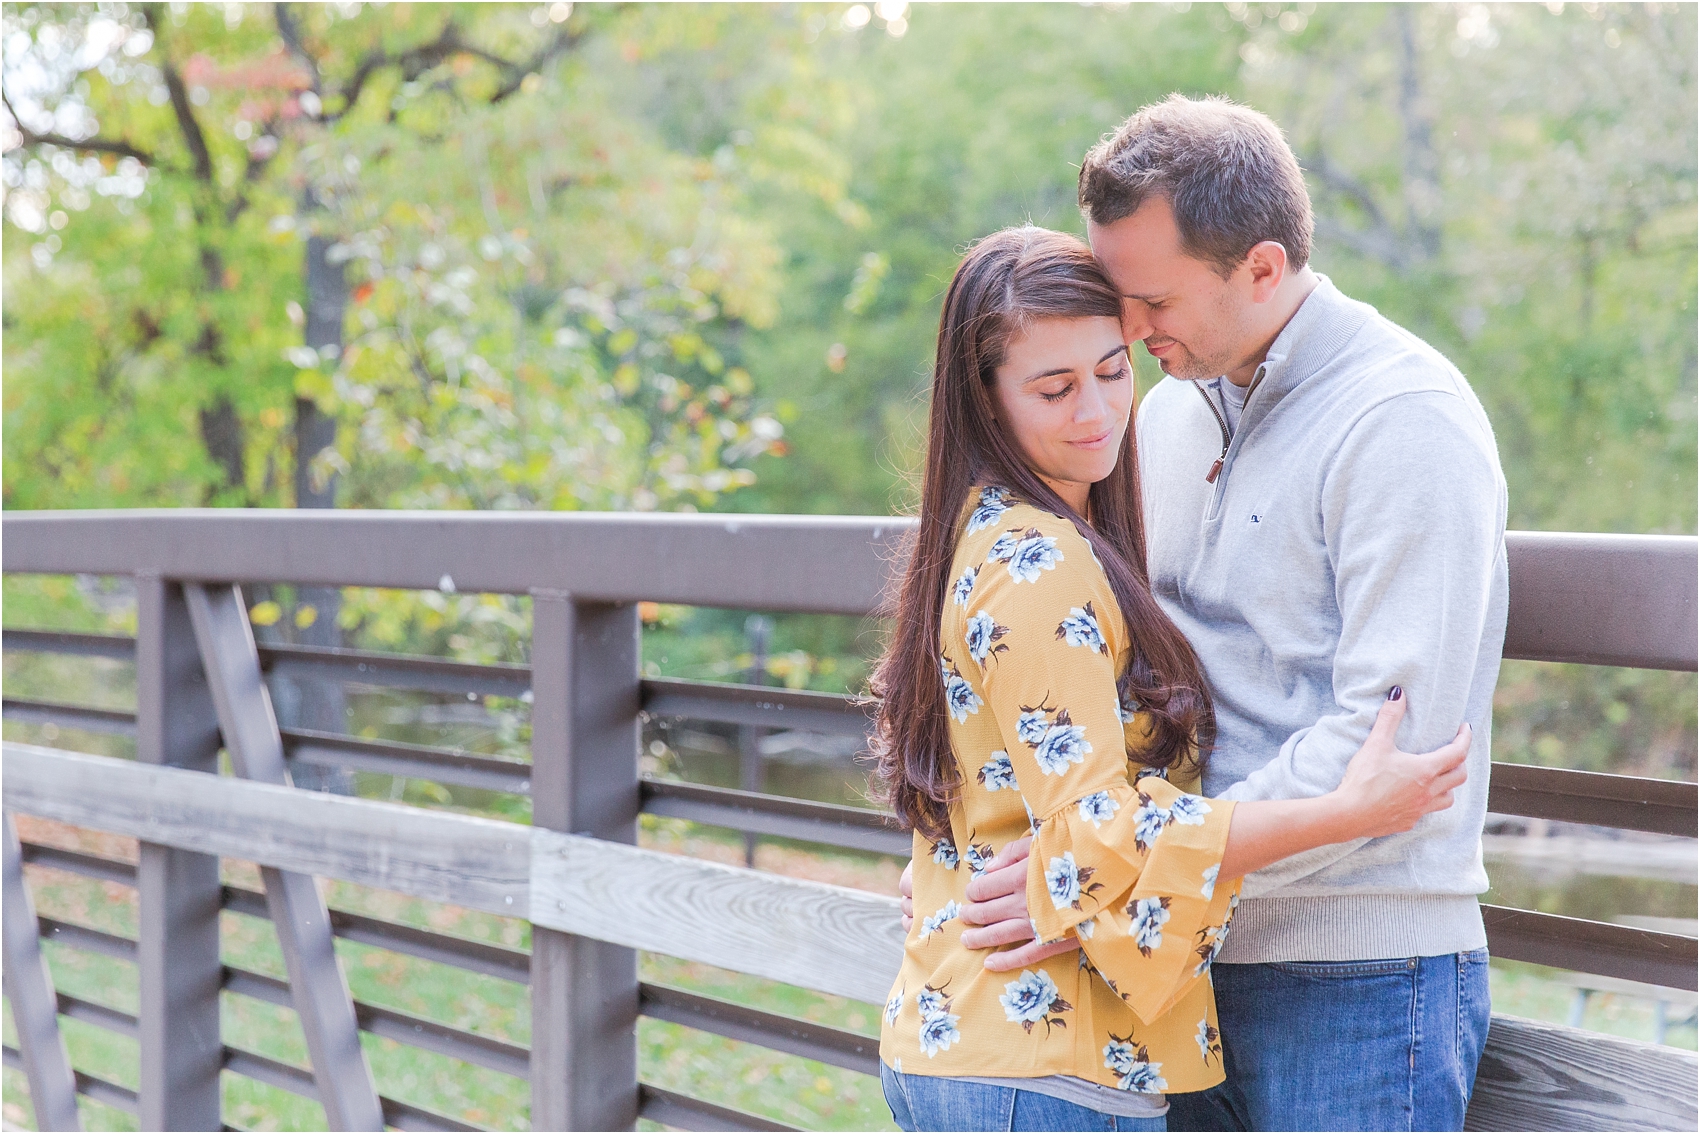 relaxed-autumn-engagement-photos-at-hudson-mills-metropark-in-dexter-mi-by-courtney-carolyn-photography_0044.jpg